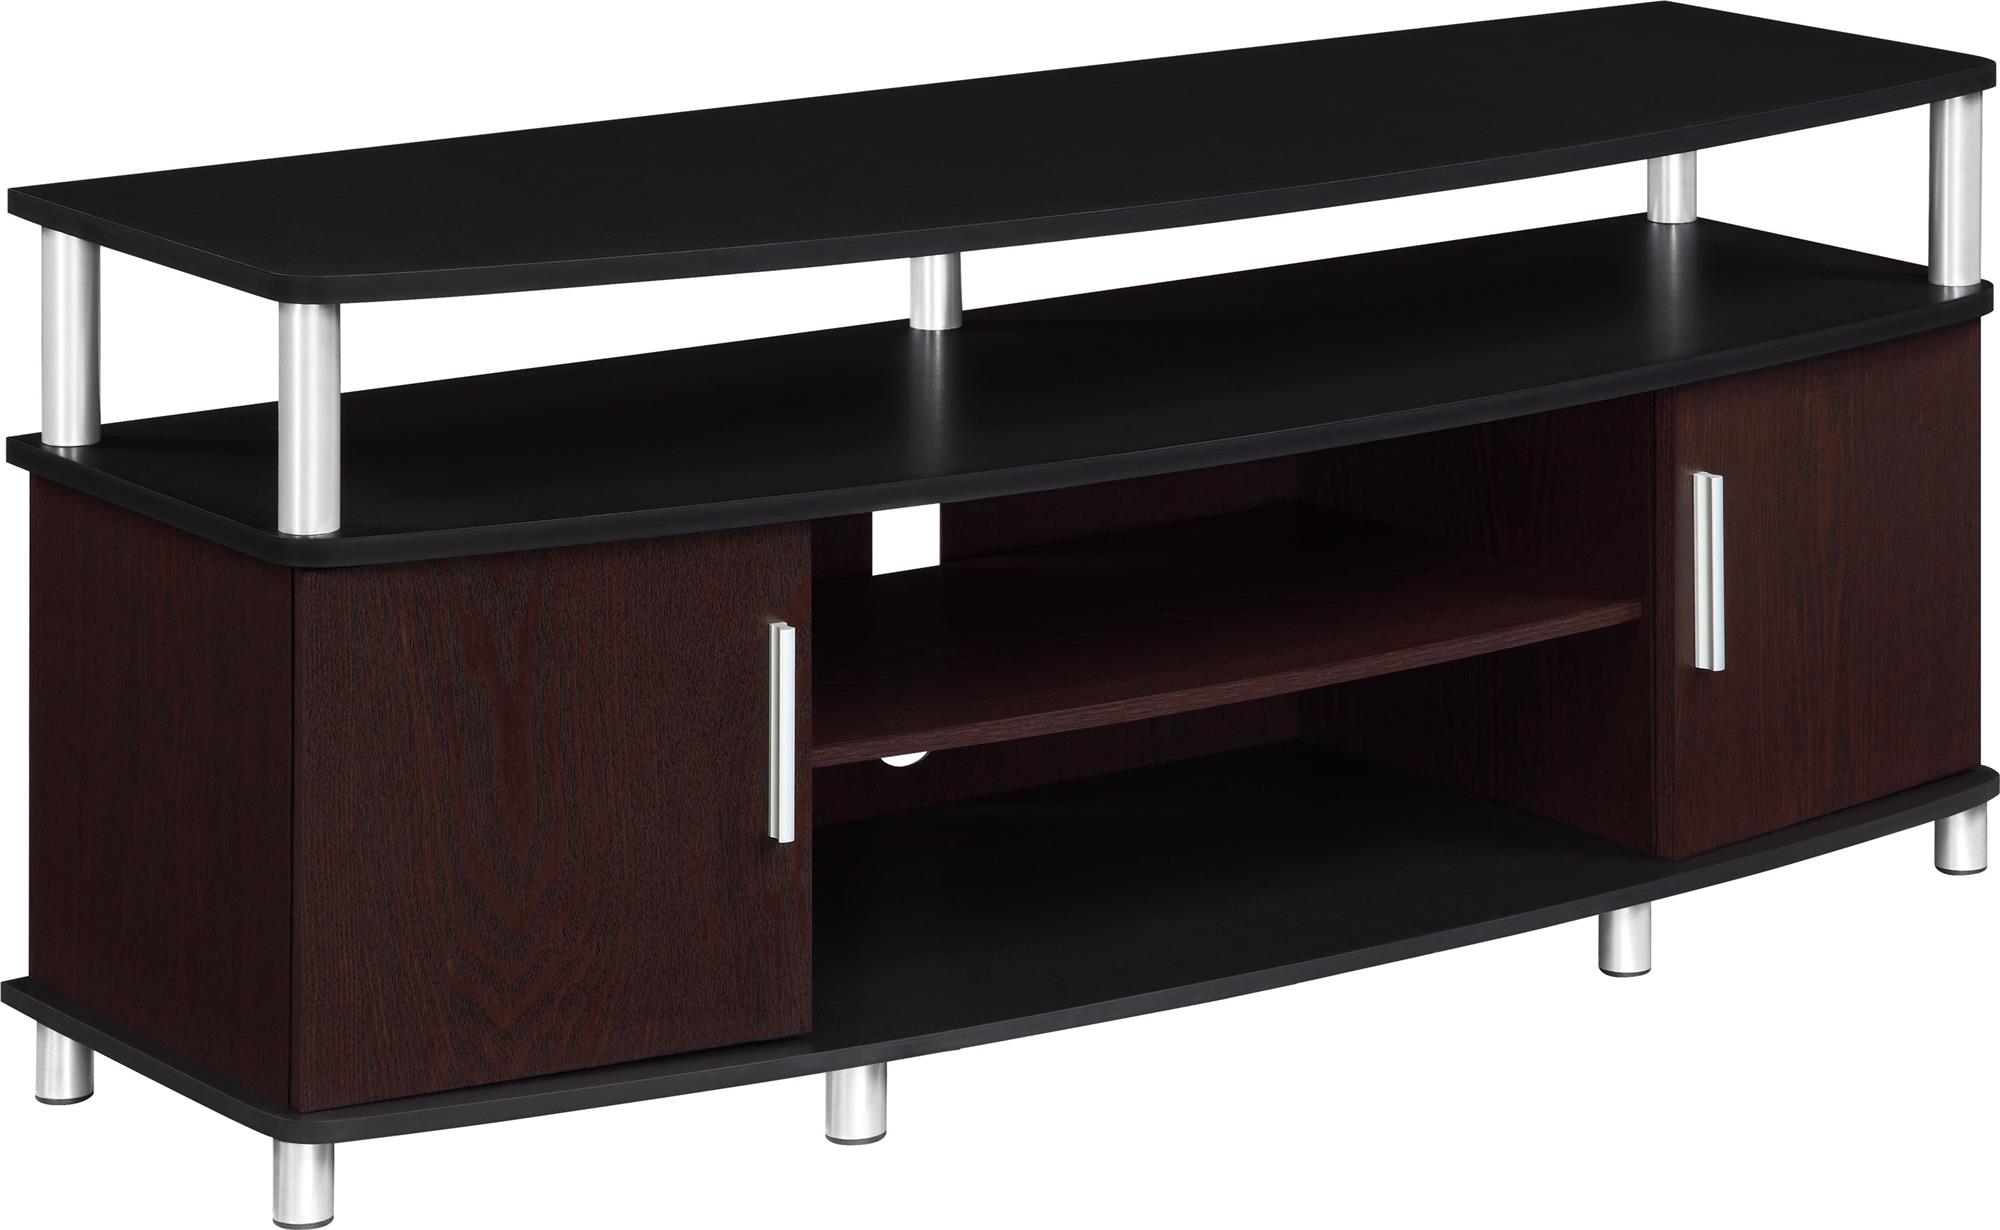 Carson TV Stand for TVs up to 50", Cherry - image 5 of 12